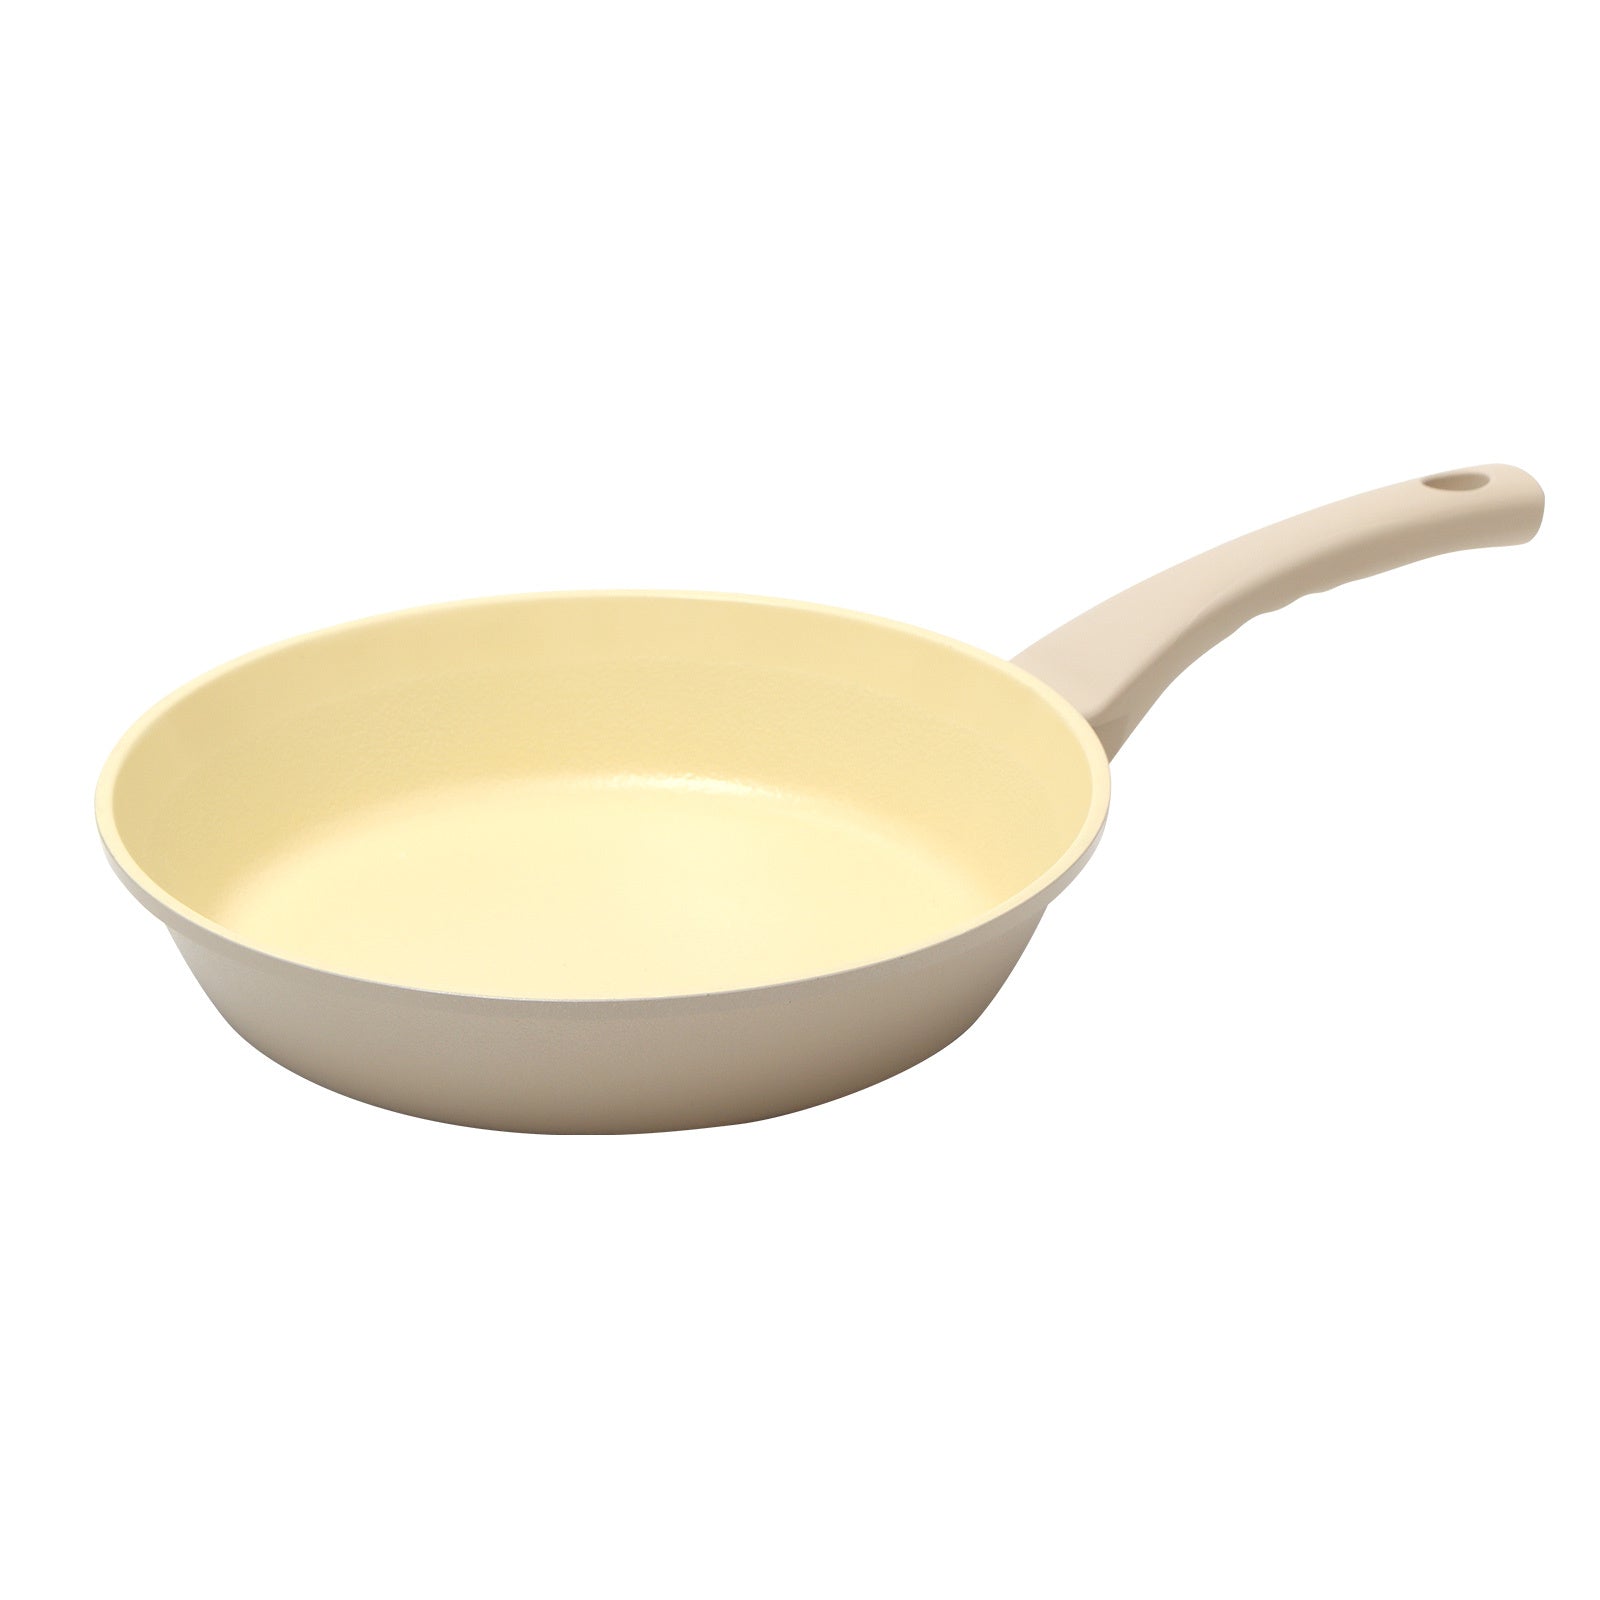 Giorno Felice 28cm Beige IH Frypan Ceramic Non-Stick Frying Pan Induction